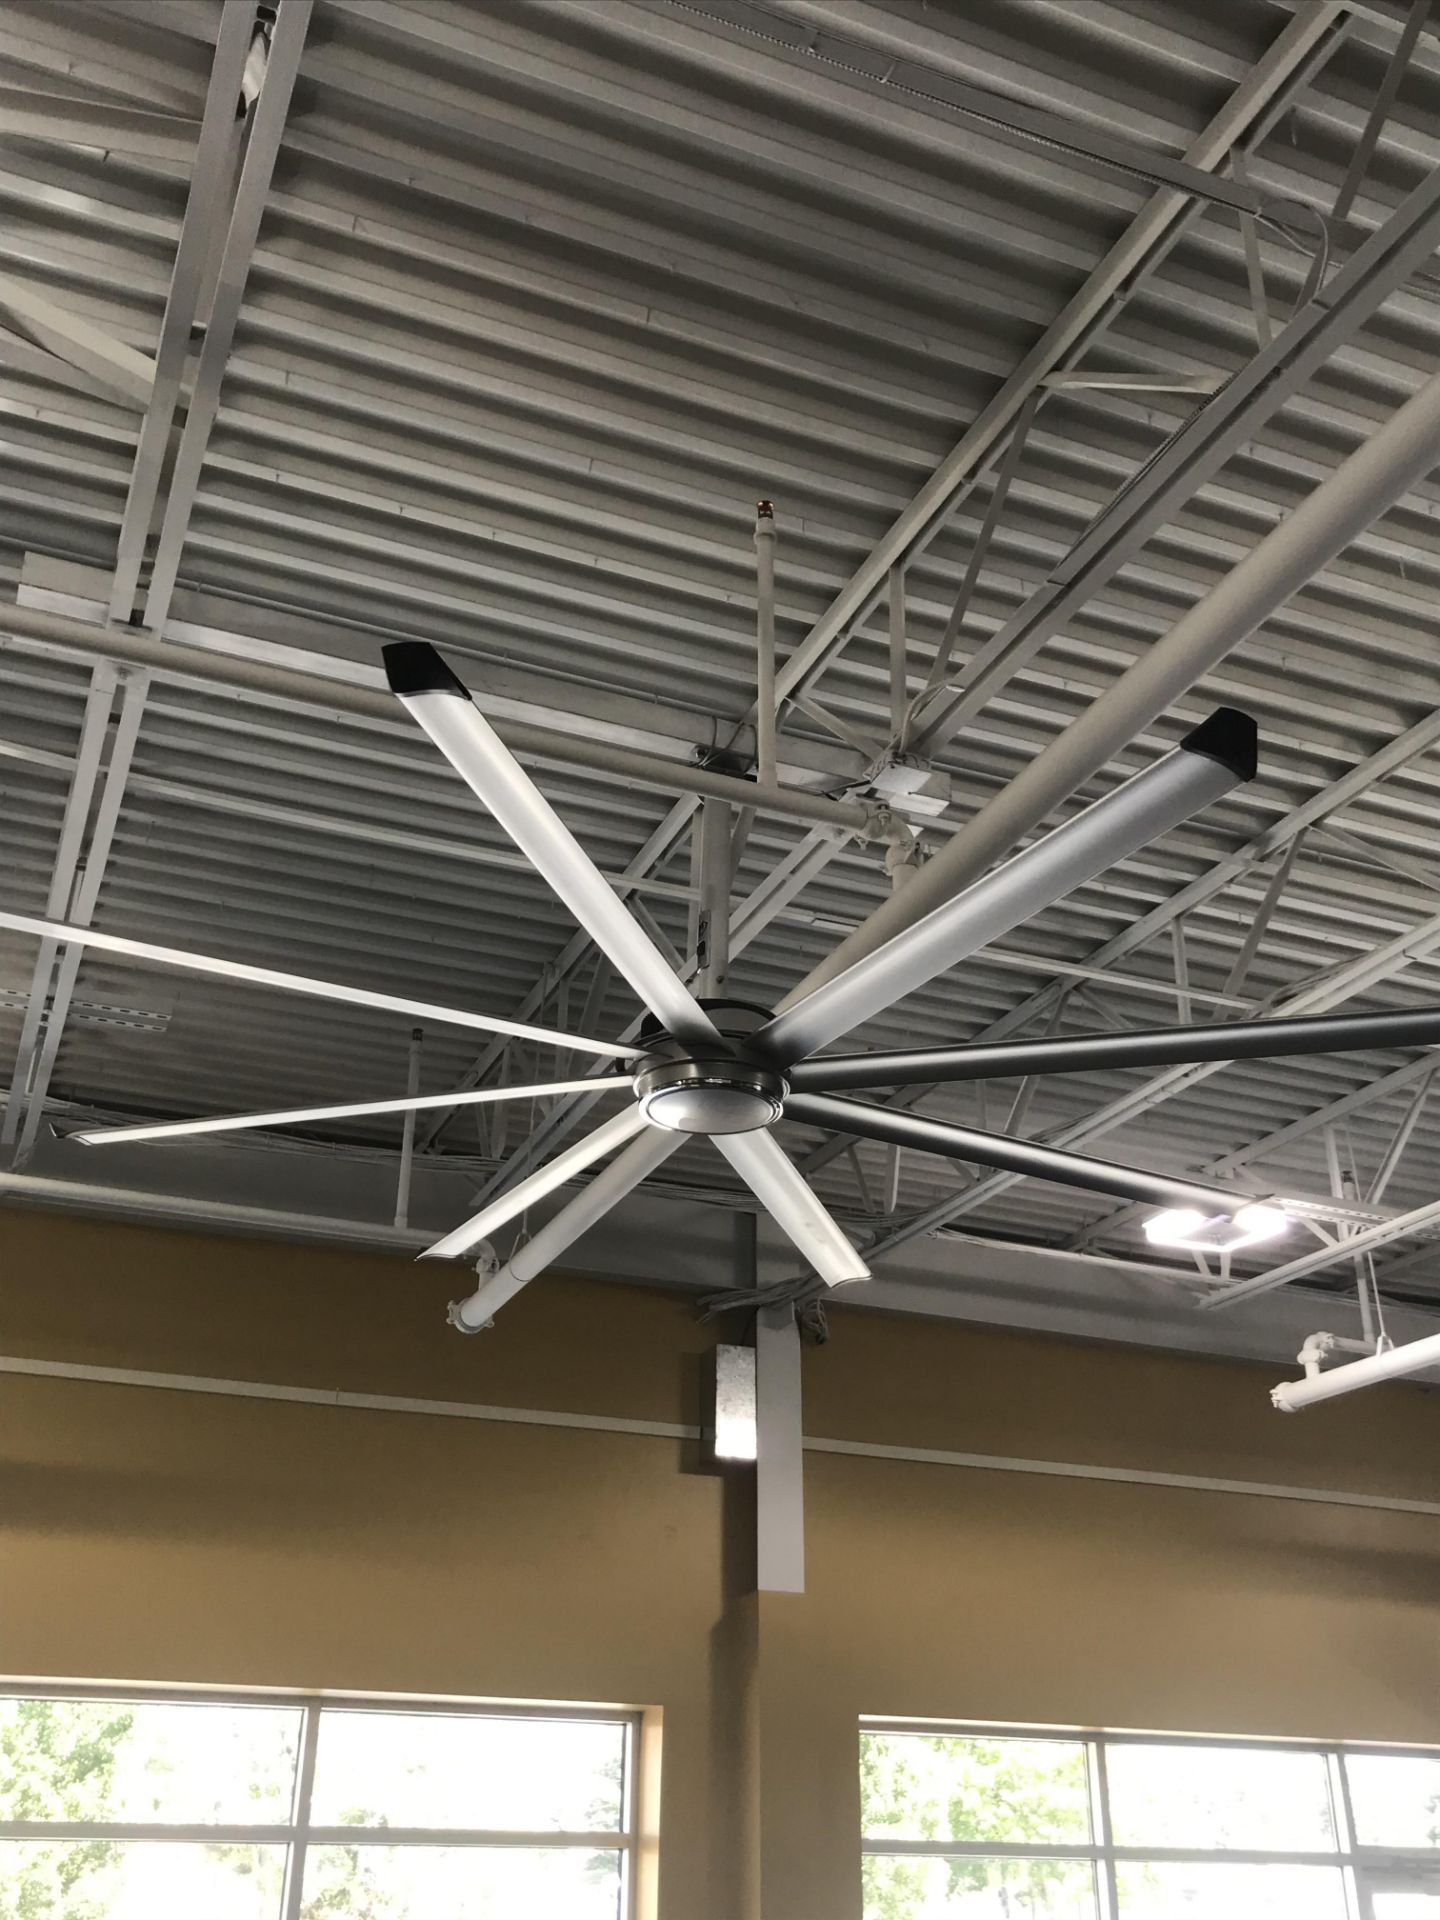 Big Ass 8 Bladed, 8 feet Metal Fan (Subject to Confirmation)(BUYER RESPONSIBLE FOR REMOVAL)